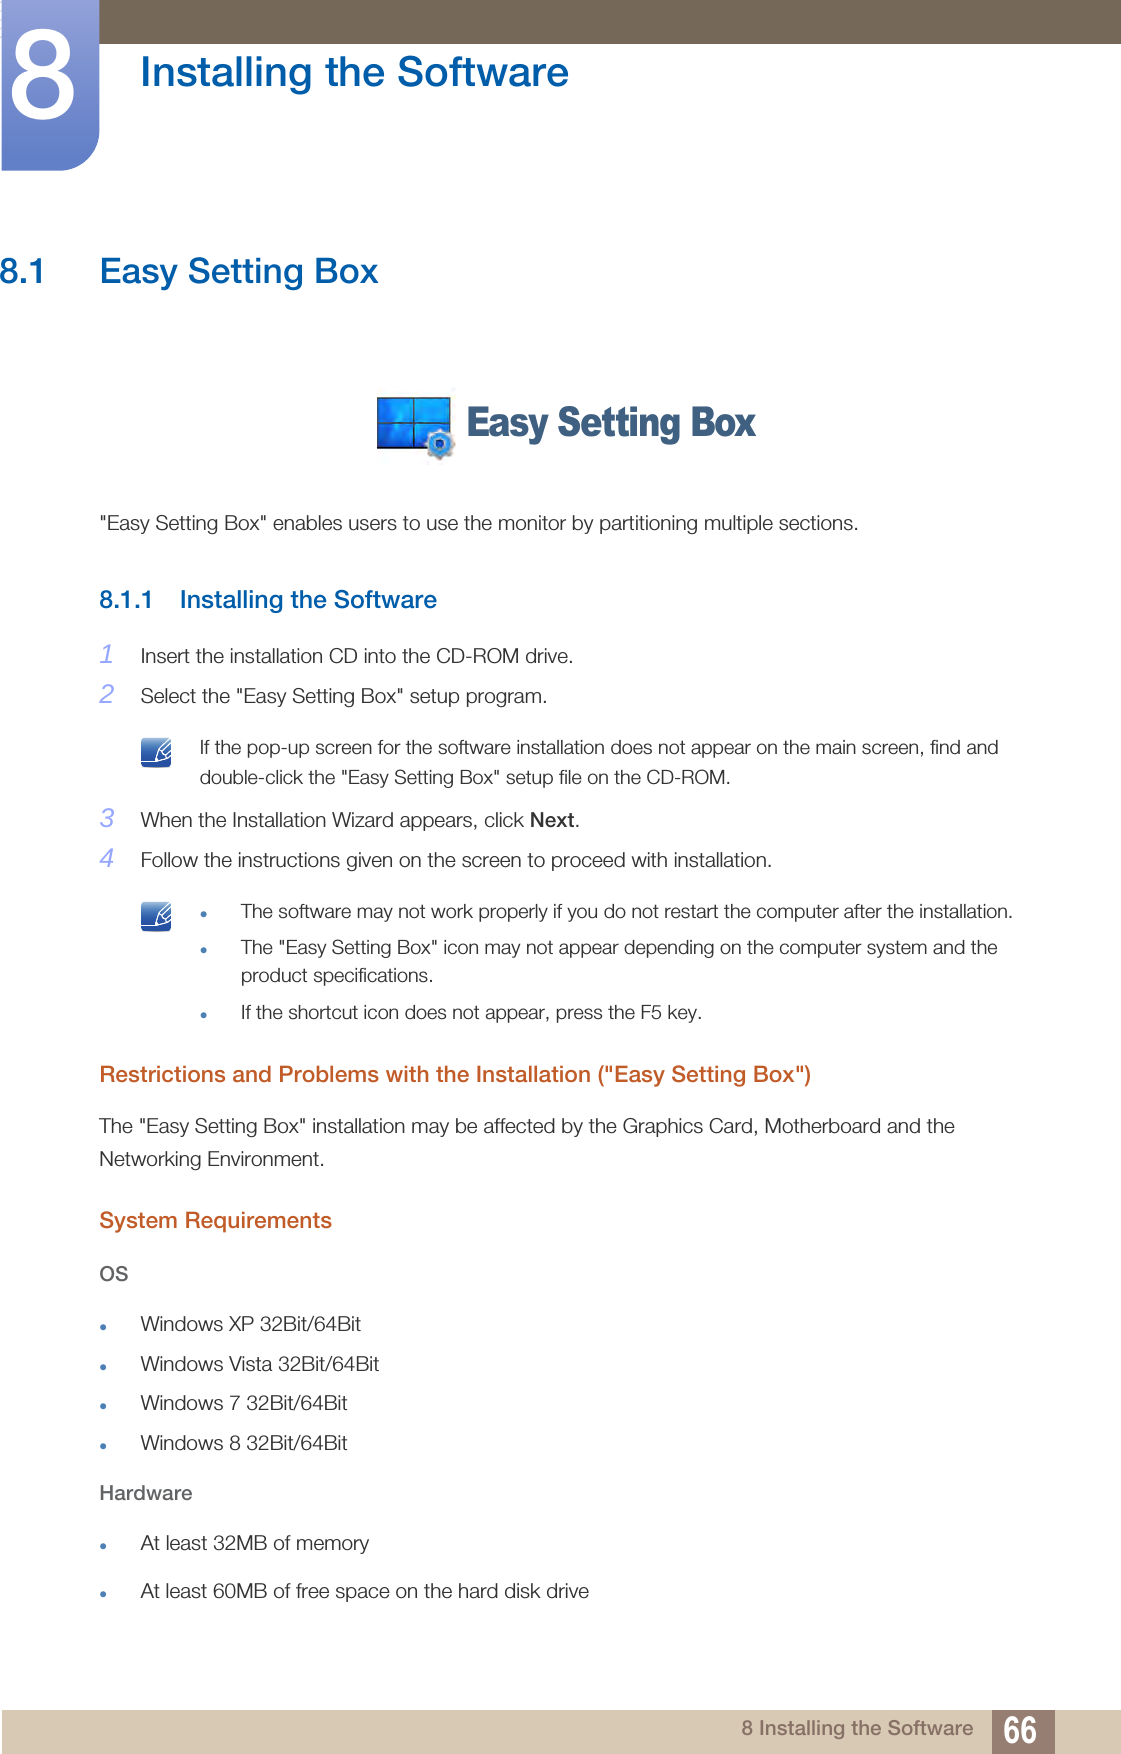 668 Installing the Software8  Installing the Software8.1 Easy Setting Box&quot;Easy Setting Box&quot; enables users to use the monitor by partitioning multiple sections.8.1.1 Installing the Software1Insert the installation CD into the CD-ROM drive.2Select the &quot;Easy Setting Box&quot; setup program. If the pop-up screen for the software installation does not appear on the main screen, find and double-click the &quot;Easy Setting Box&quot; setup file on the CD-ROM. 3When the Installation Wizard appears, click Next.4Follow the instructions given on the screen to proceed with installation. The software may not work properly if you do not restart the computer after the installation.The &quot;Easy Setting Box&quot; icon may not appear depending on the computer system and the product specifications.If the shortcut icon does not appear, press the F5 key. Restrictions and Problems with the Installation (&quot;Easy Setting Box&quot;)The &quot;Easy Setting Box&quot; installation may be affected by the Graphics Card, Motherboard and the Networking Environment.System RequirementsOSWindows XP 32Bit/64BitWindows Vista 32Bit/64BitWindows 7 32Bit/64BitWindows 8 32Bit/64BitHardwareAt least 32MB of memoryAt least 60MB of free space on the hard disk driveEasy Setting Box